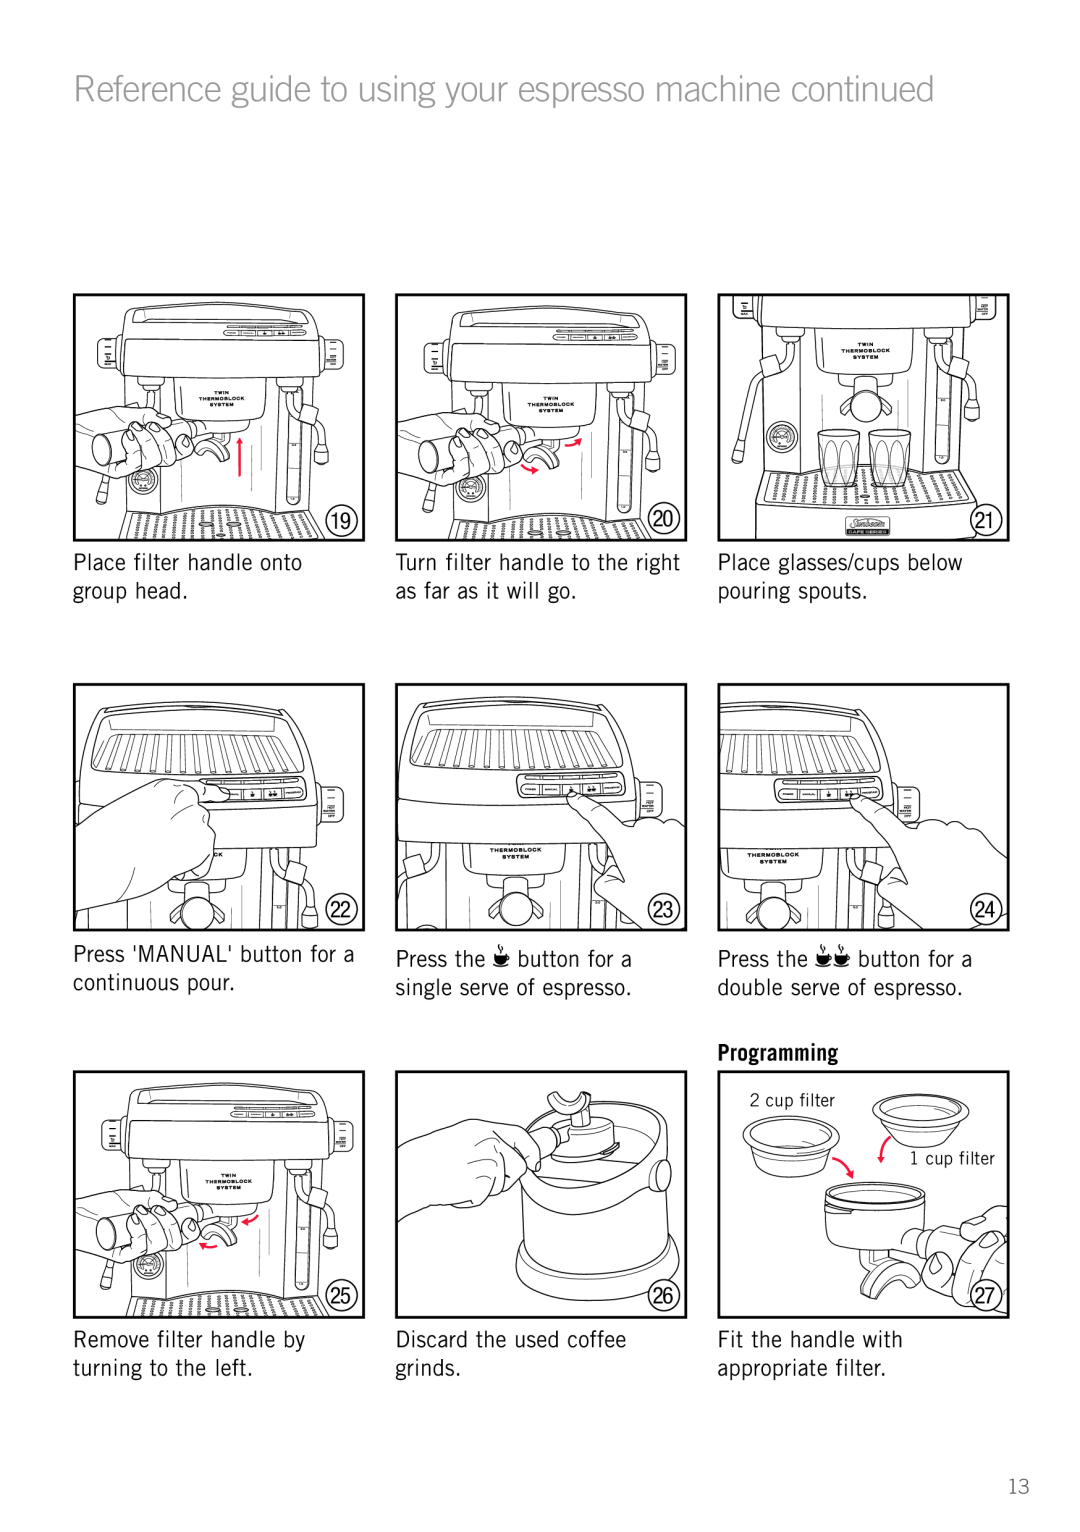 Sunbeam EM8900 manual Programming, Reference guide to using your espresso machine continued 